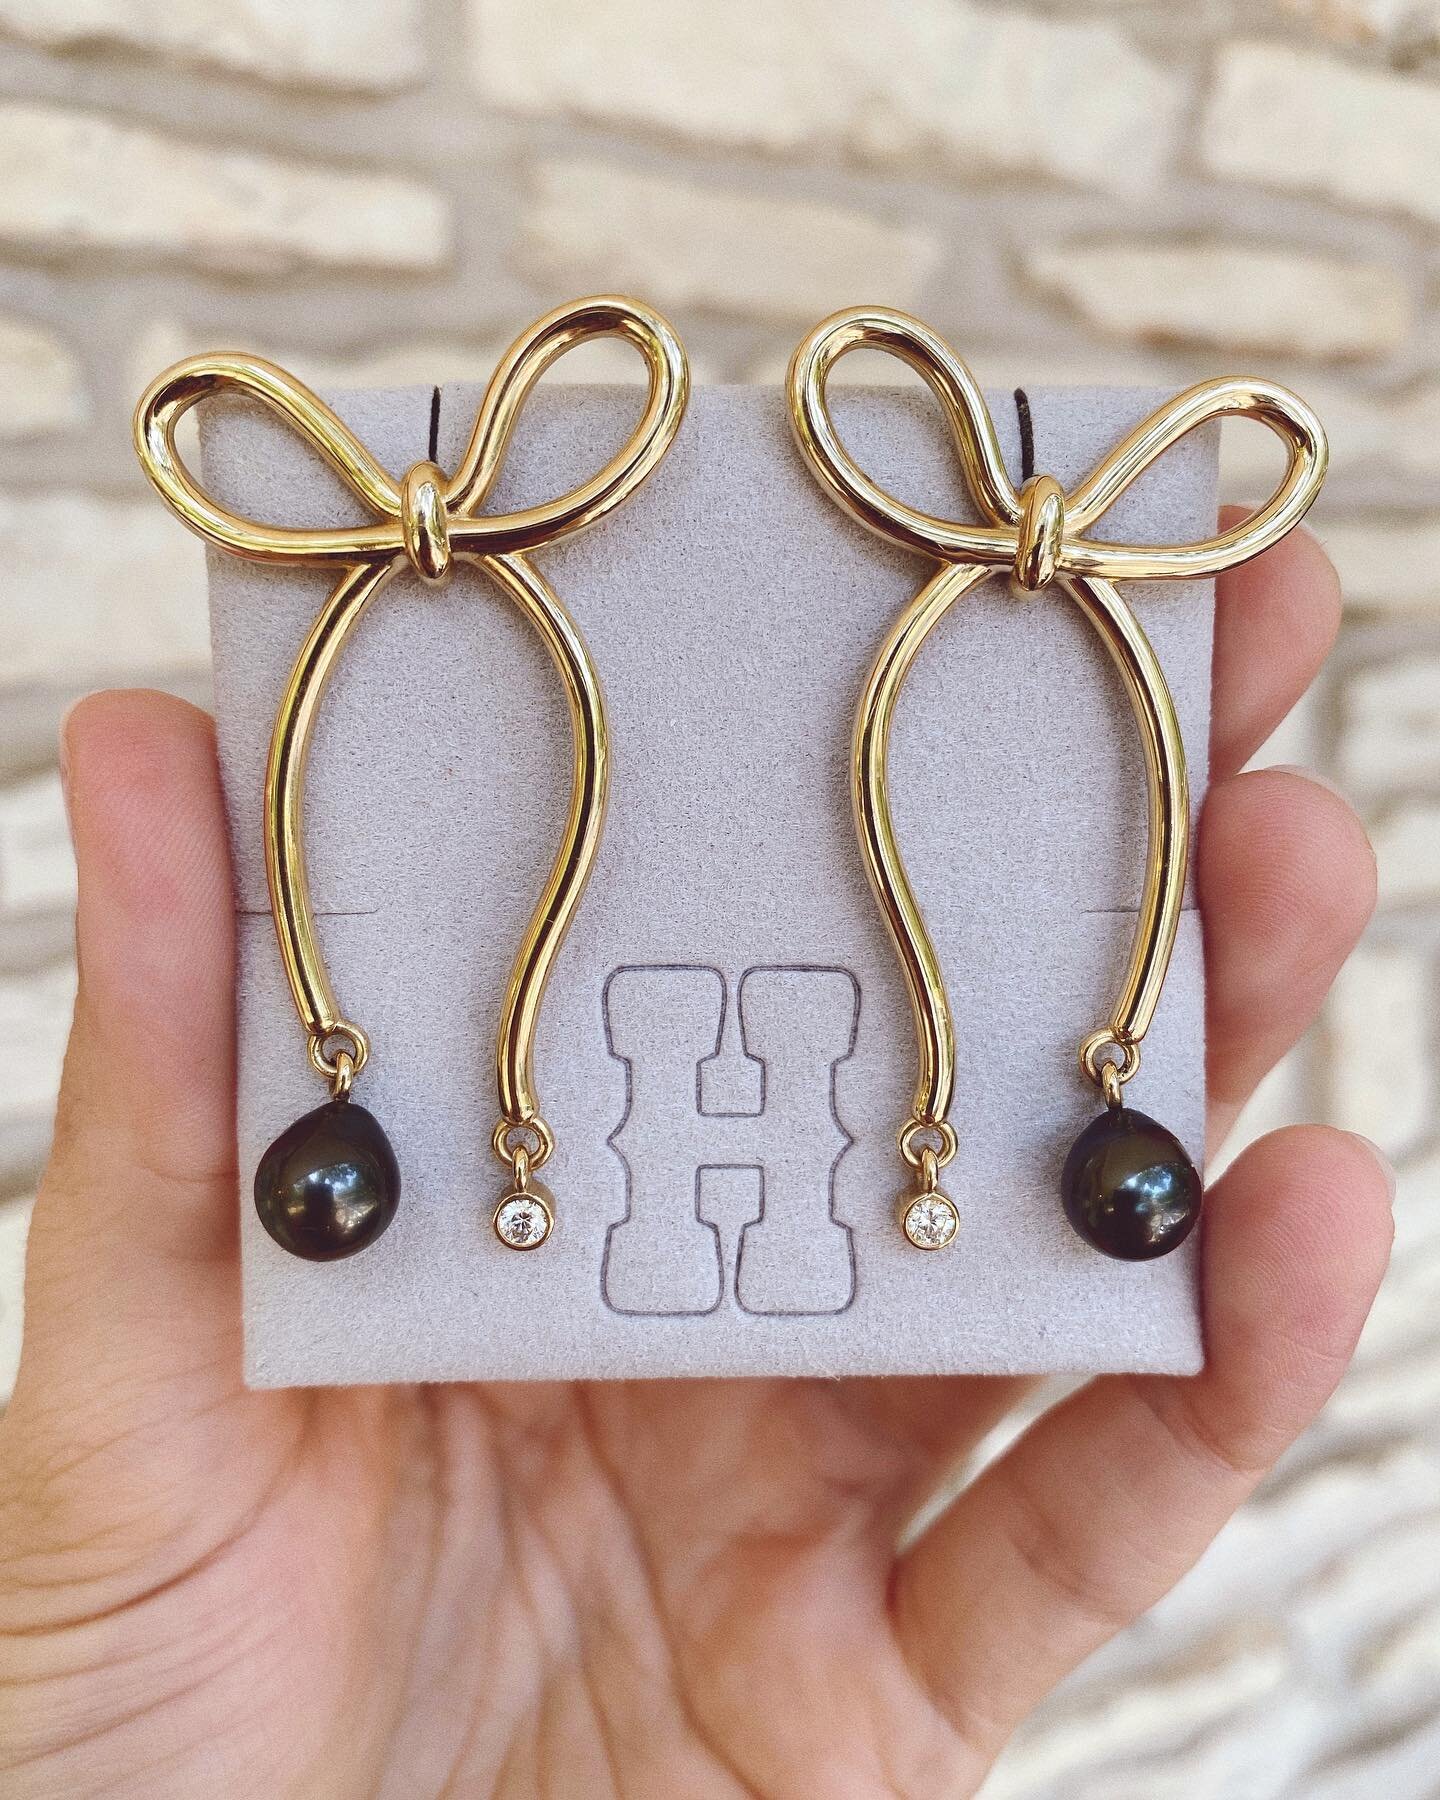 Been a little quiet here on our IG for good reason, we ran away to the Scottish Highlands to have our very own @hine.nyc wedding✨💒🌳

For the rehearsal dinner, we made these gold bow earrings with dangling diamonds &amp; black teardrop pearls 💫 The